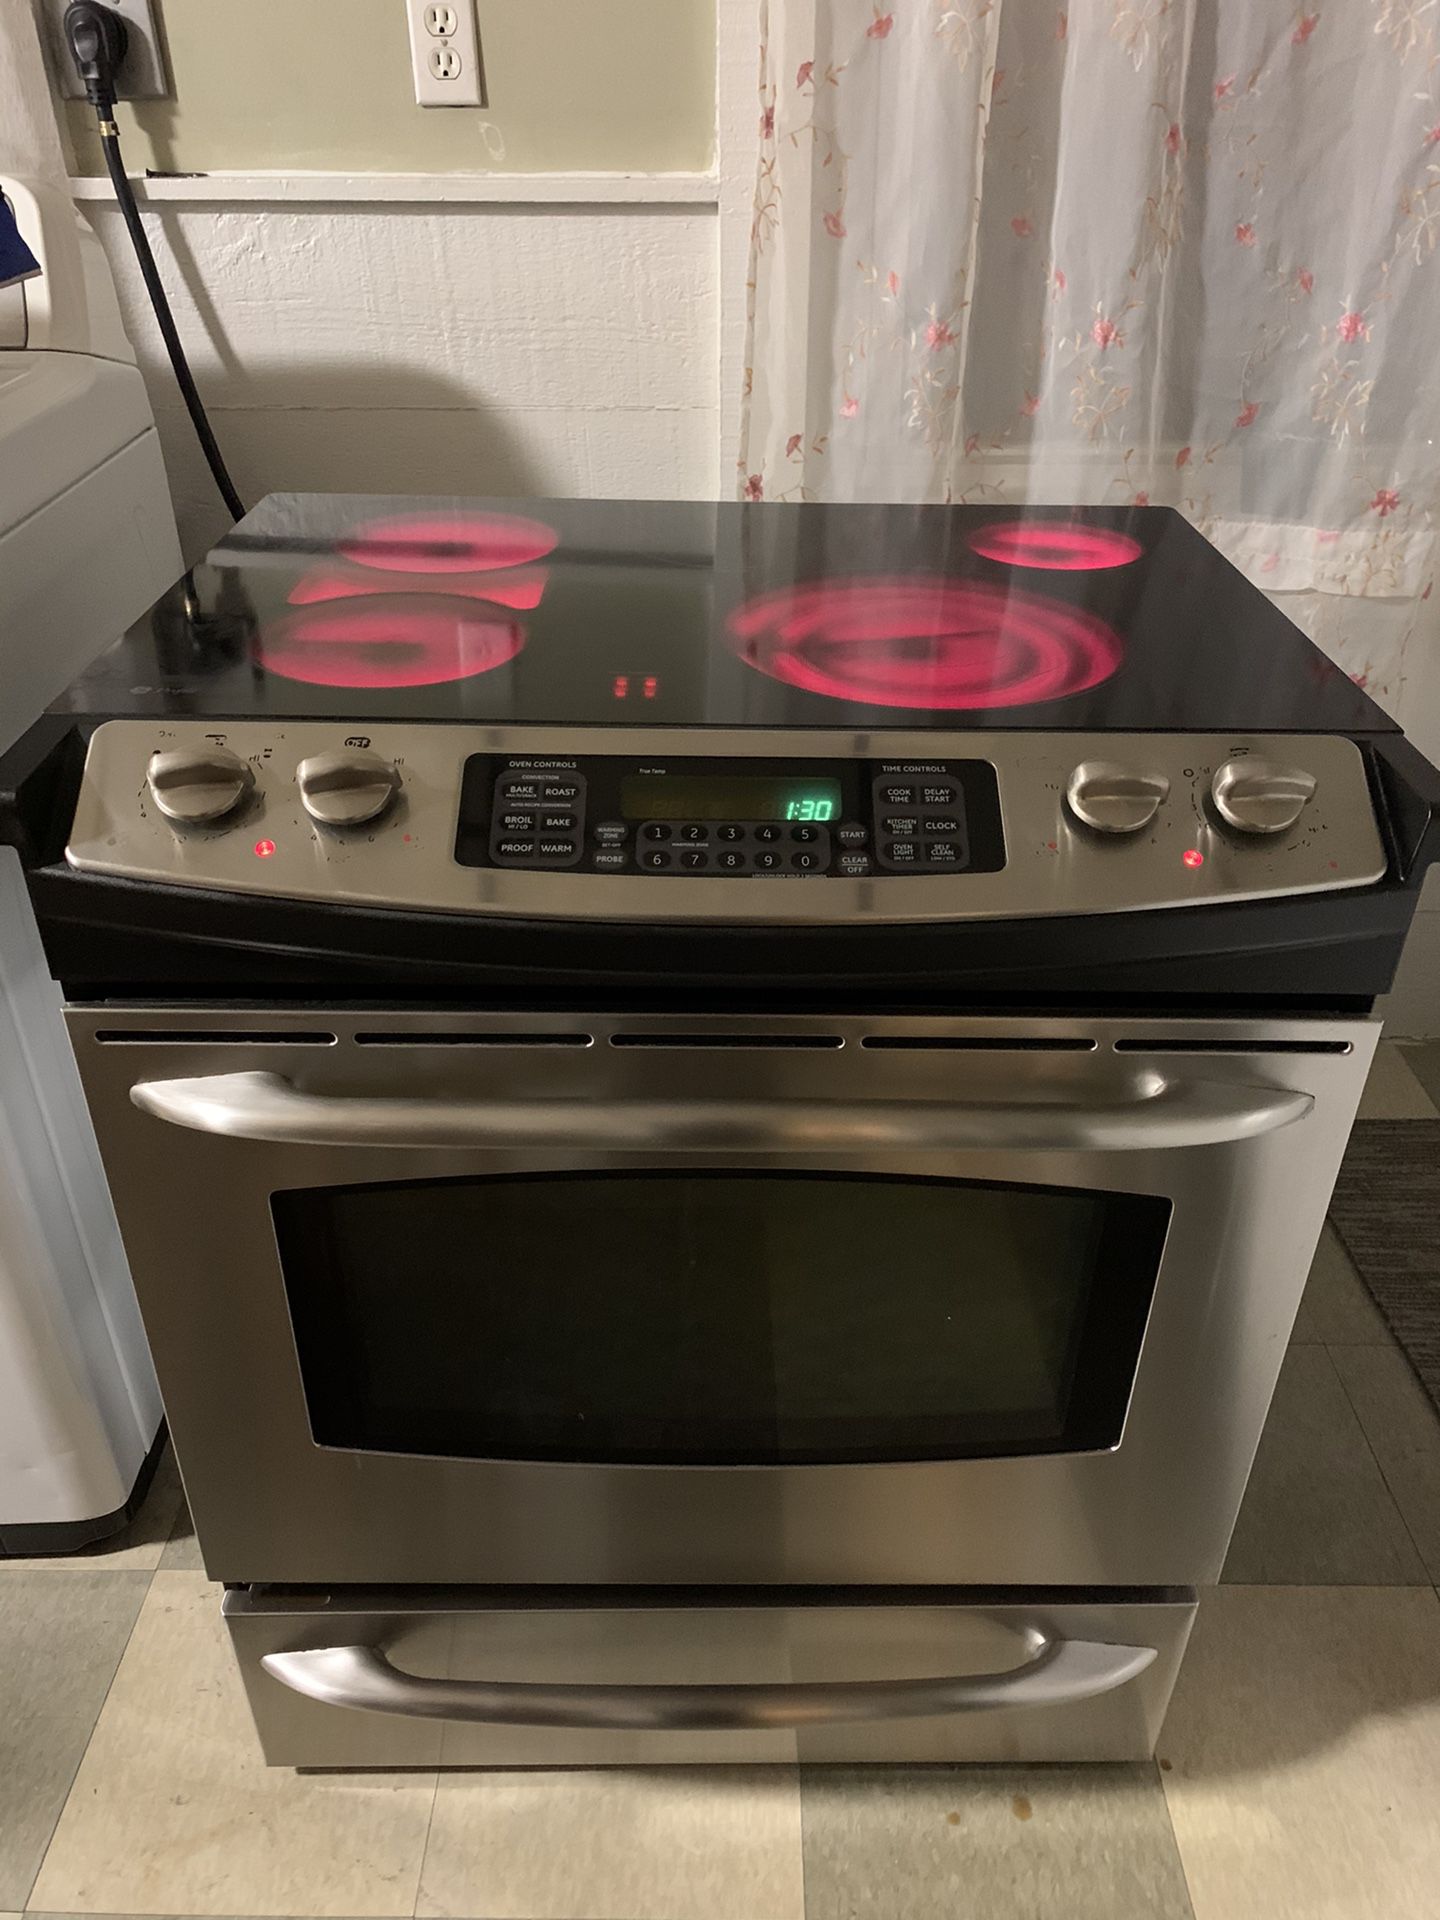 General electric stainless steel stove work perfectly